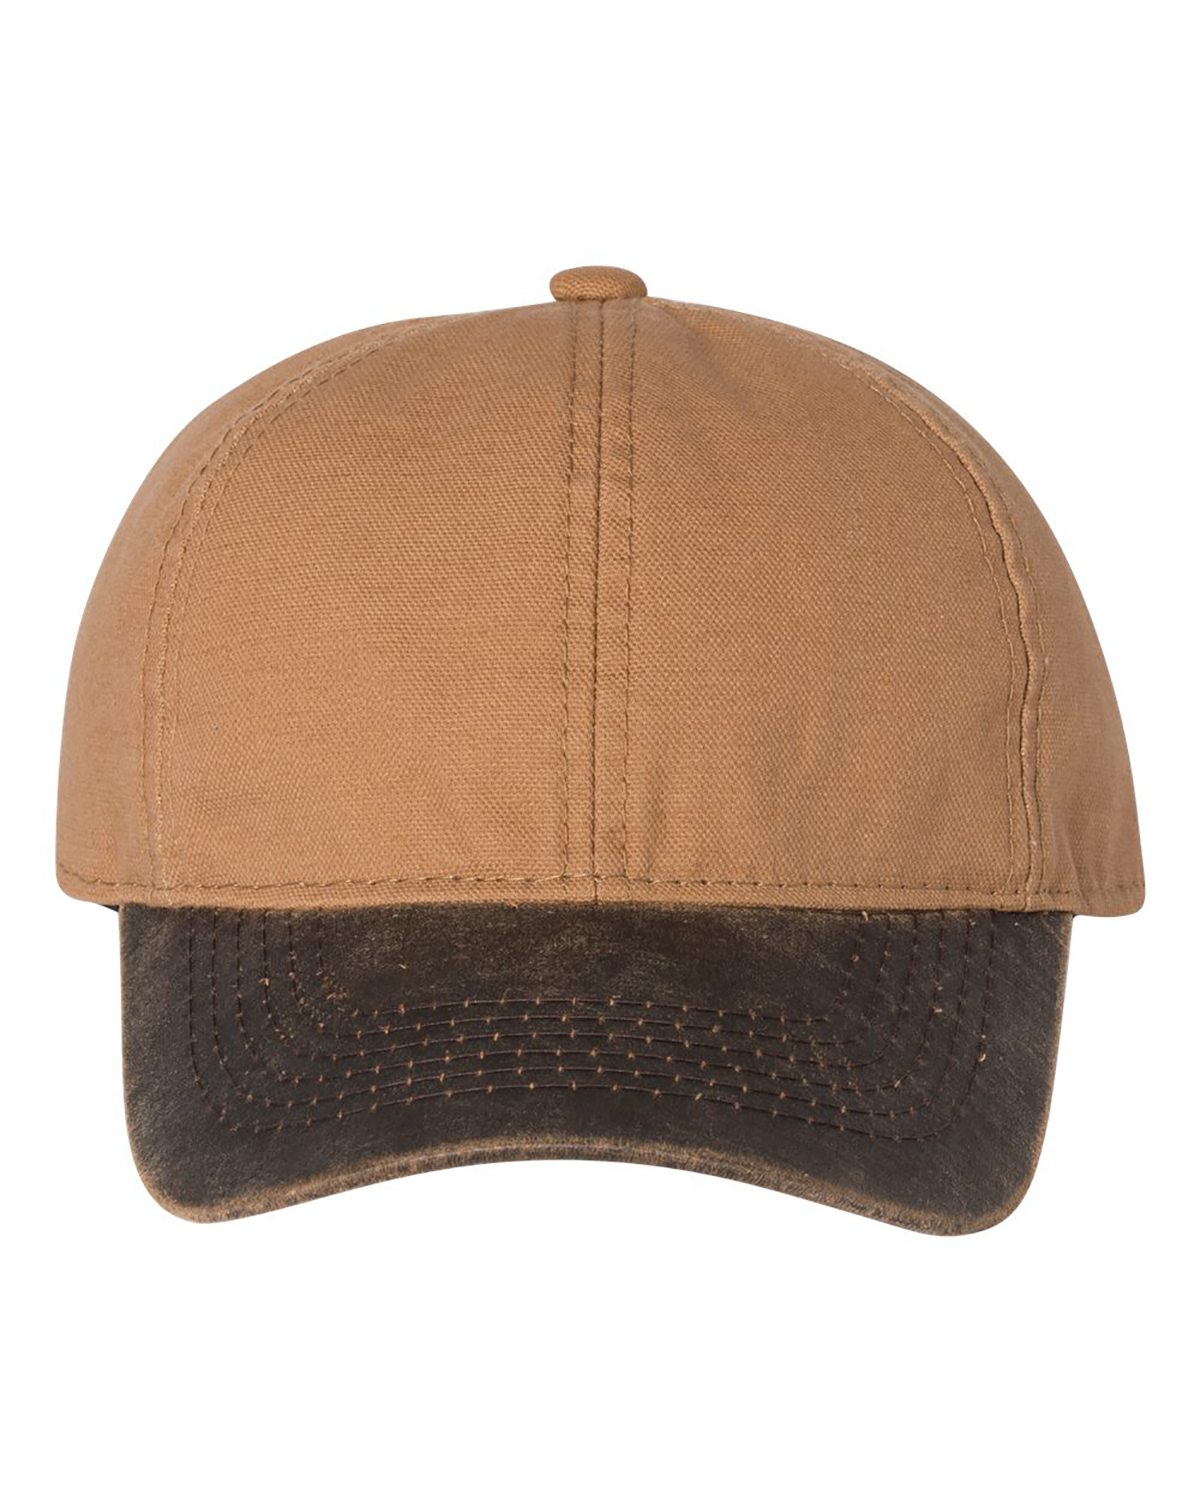 'Outdoor Cap HPK100 Canvas Cap with Weathered Cotton Visor'